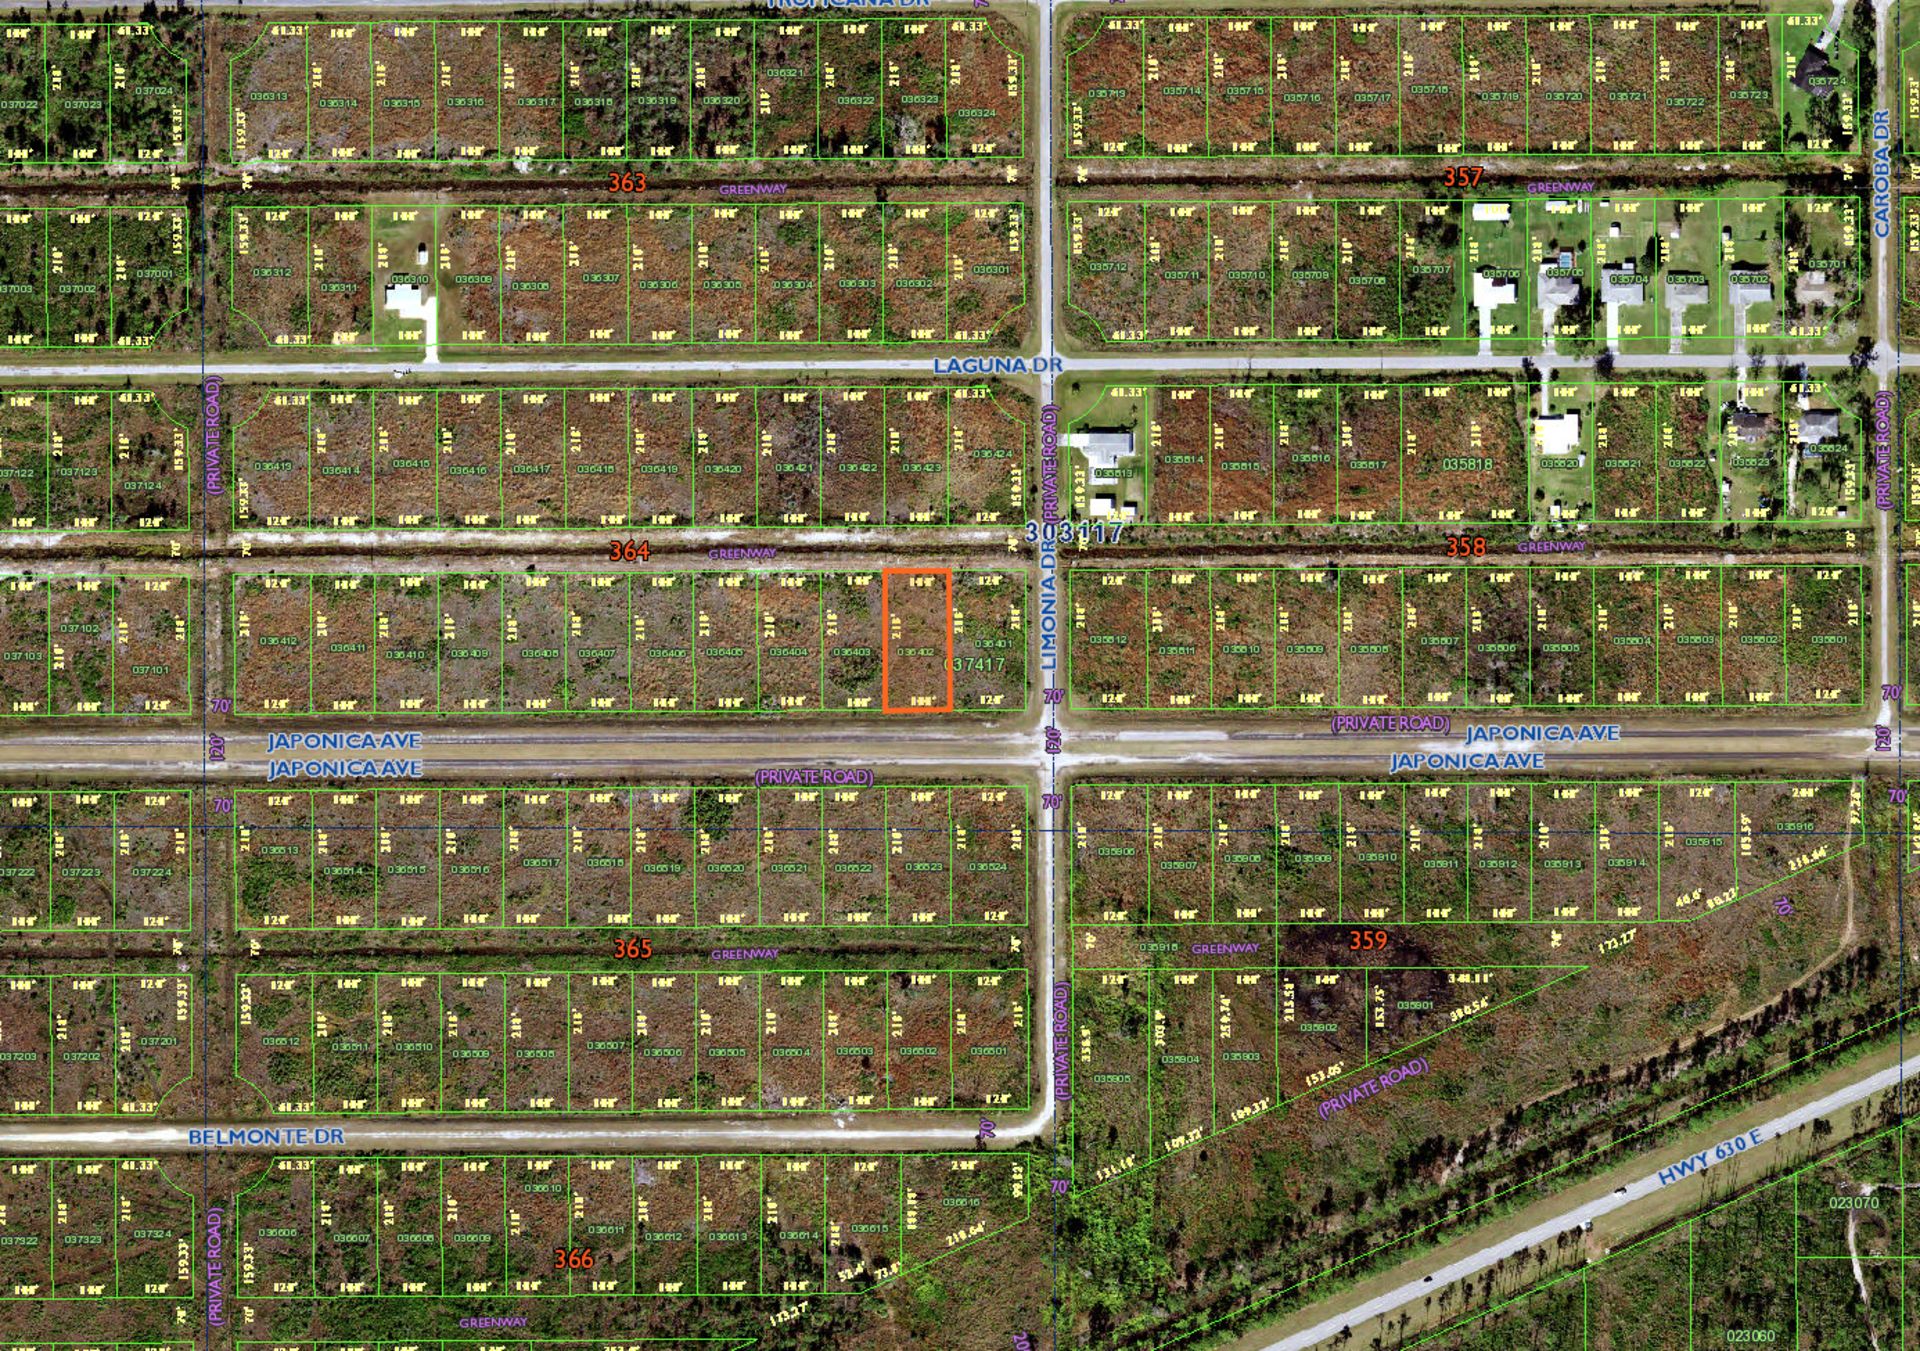 Build Your Central Florida Getaway on this Half-Acre Lot in Indian Lake Estates! - Image 2 of 11